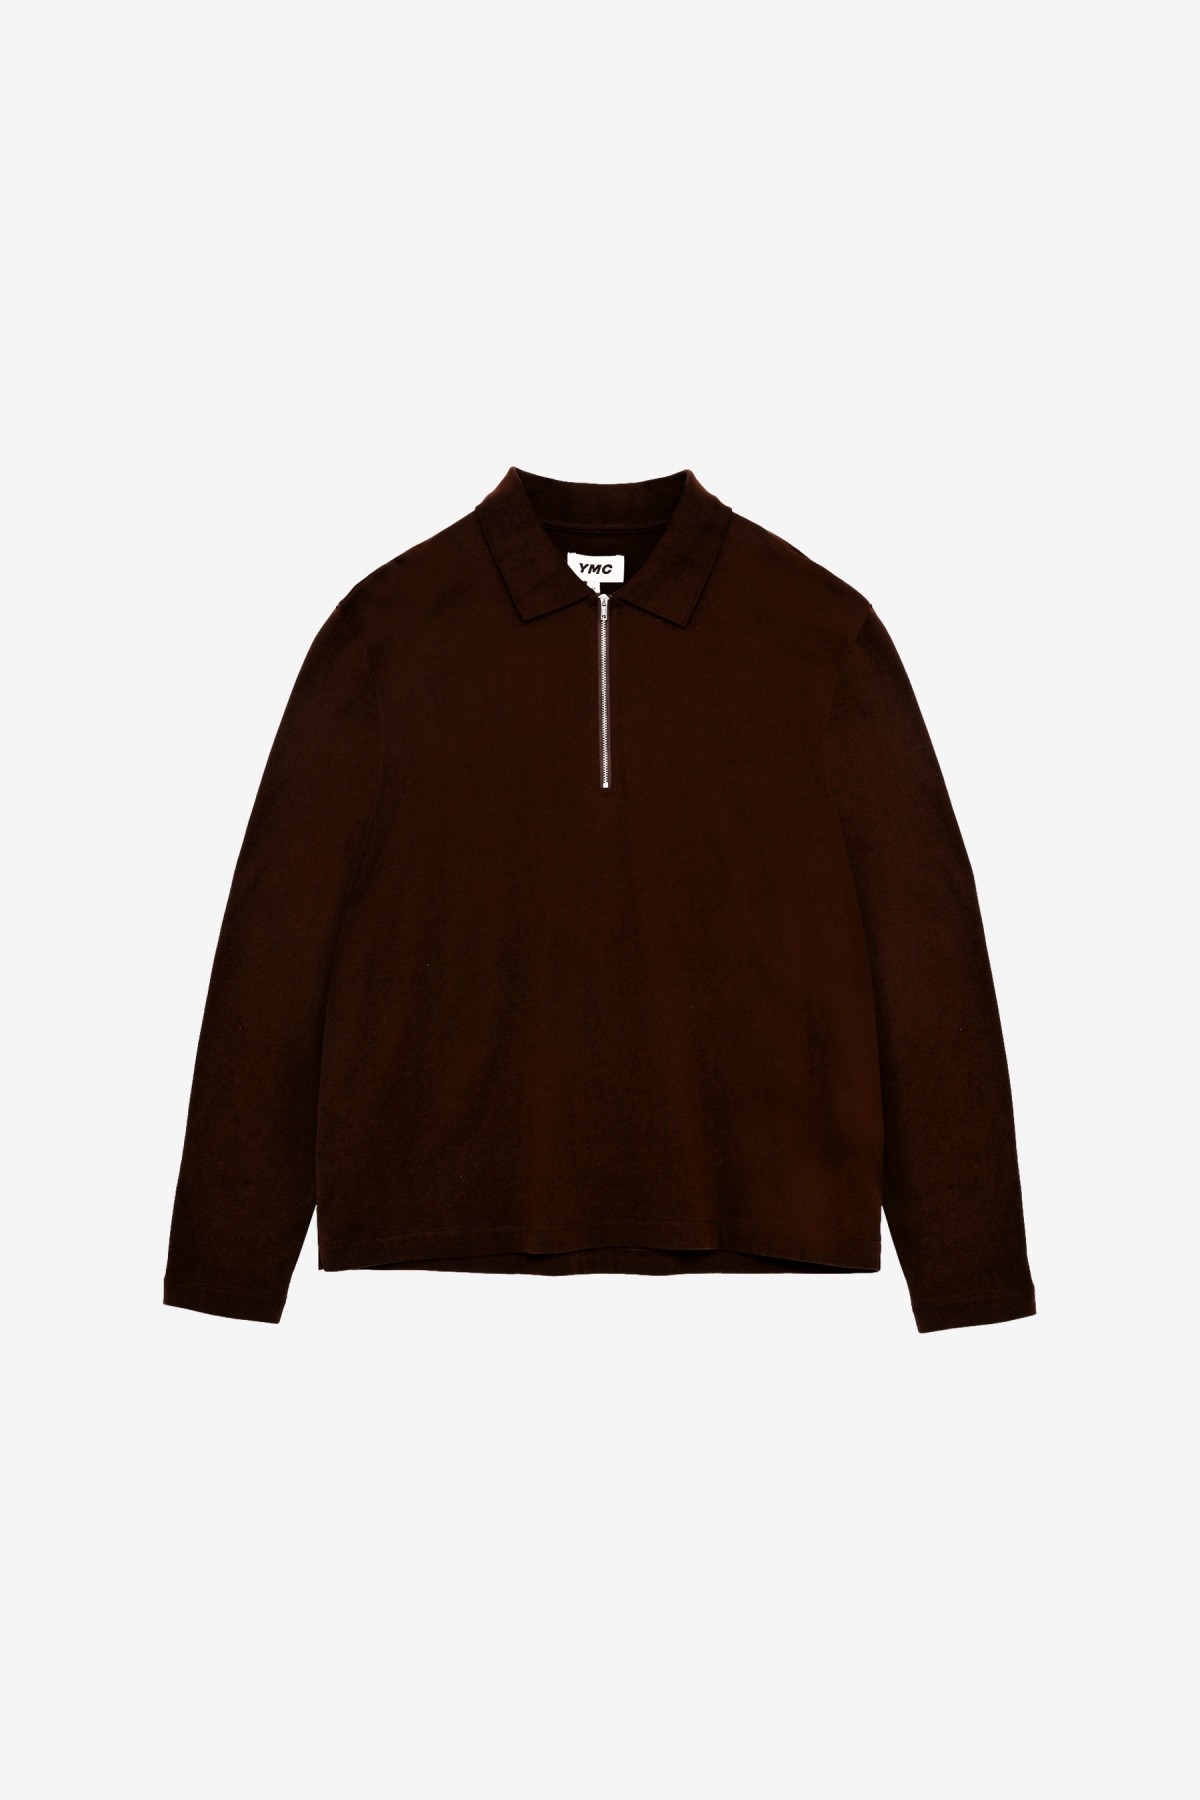 YMC You Must Create Frat Zip Polo Shirt in Brown